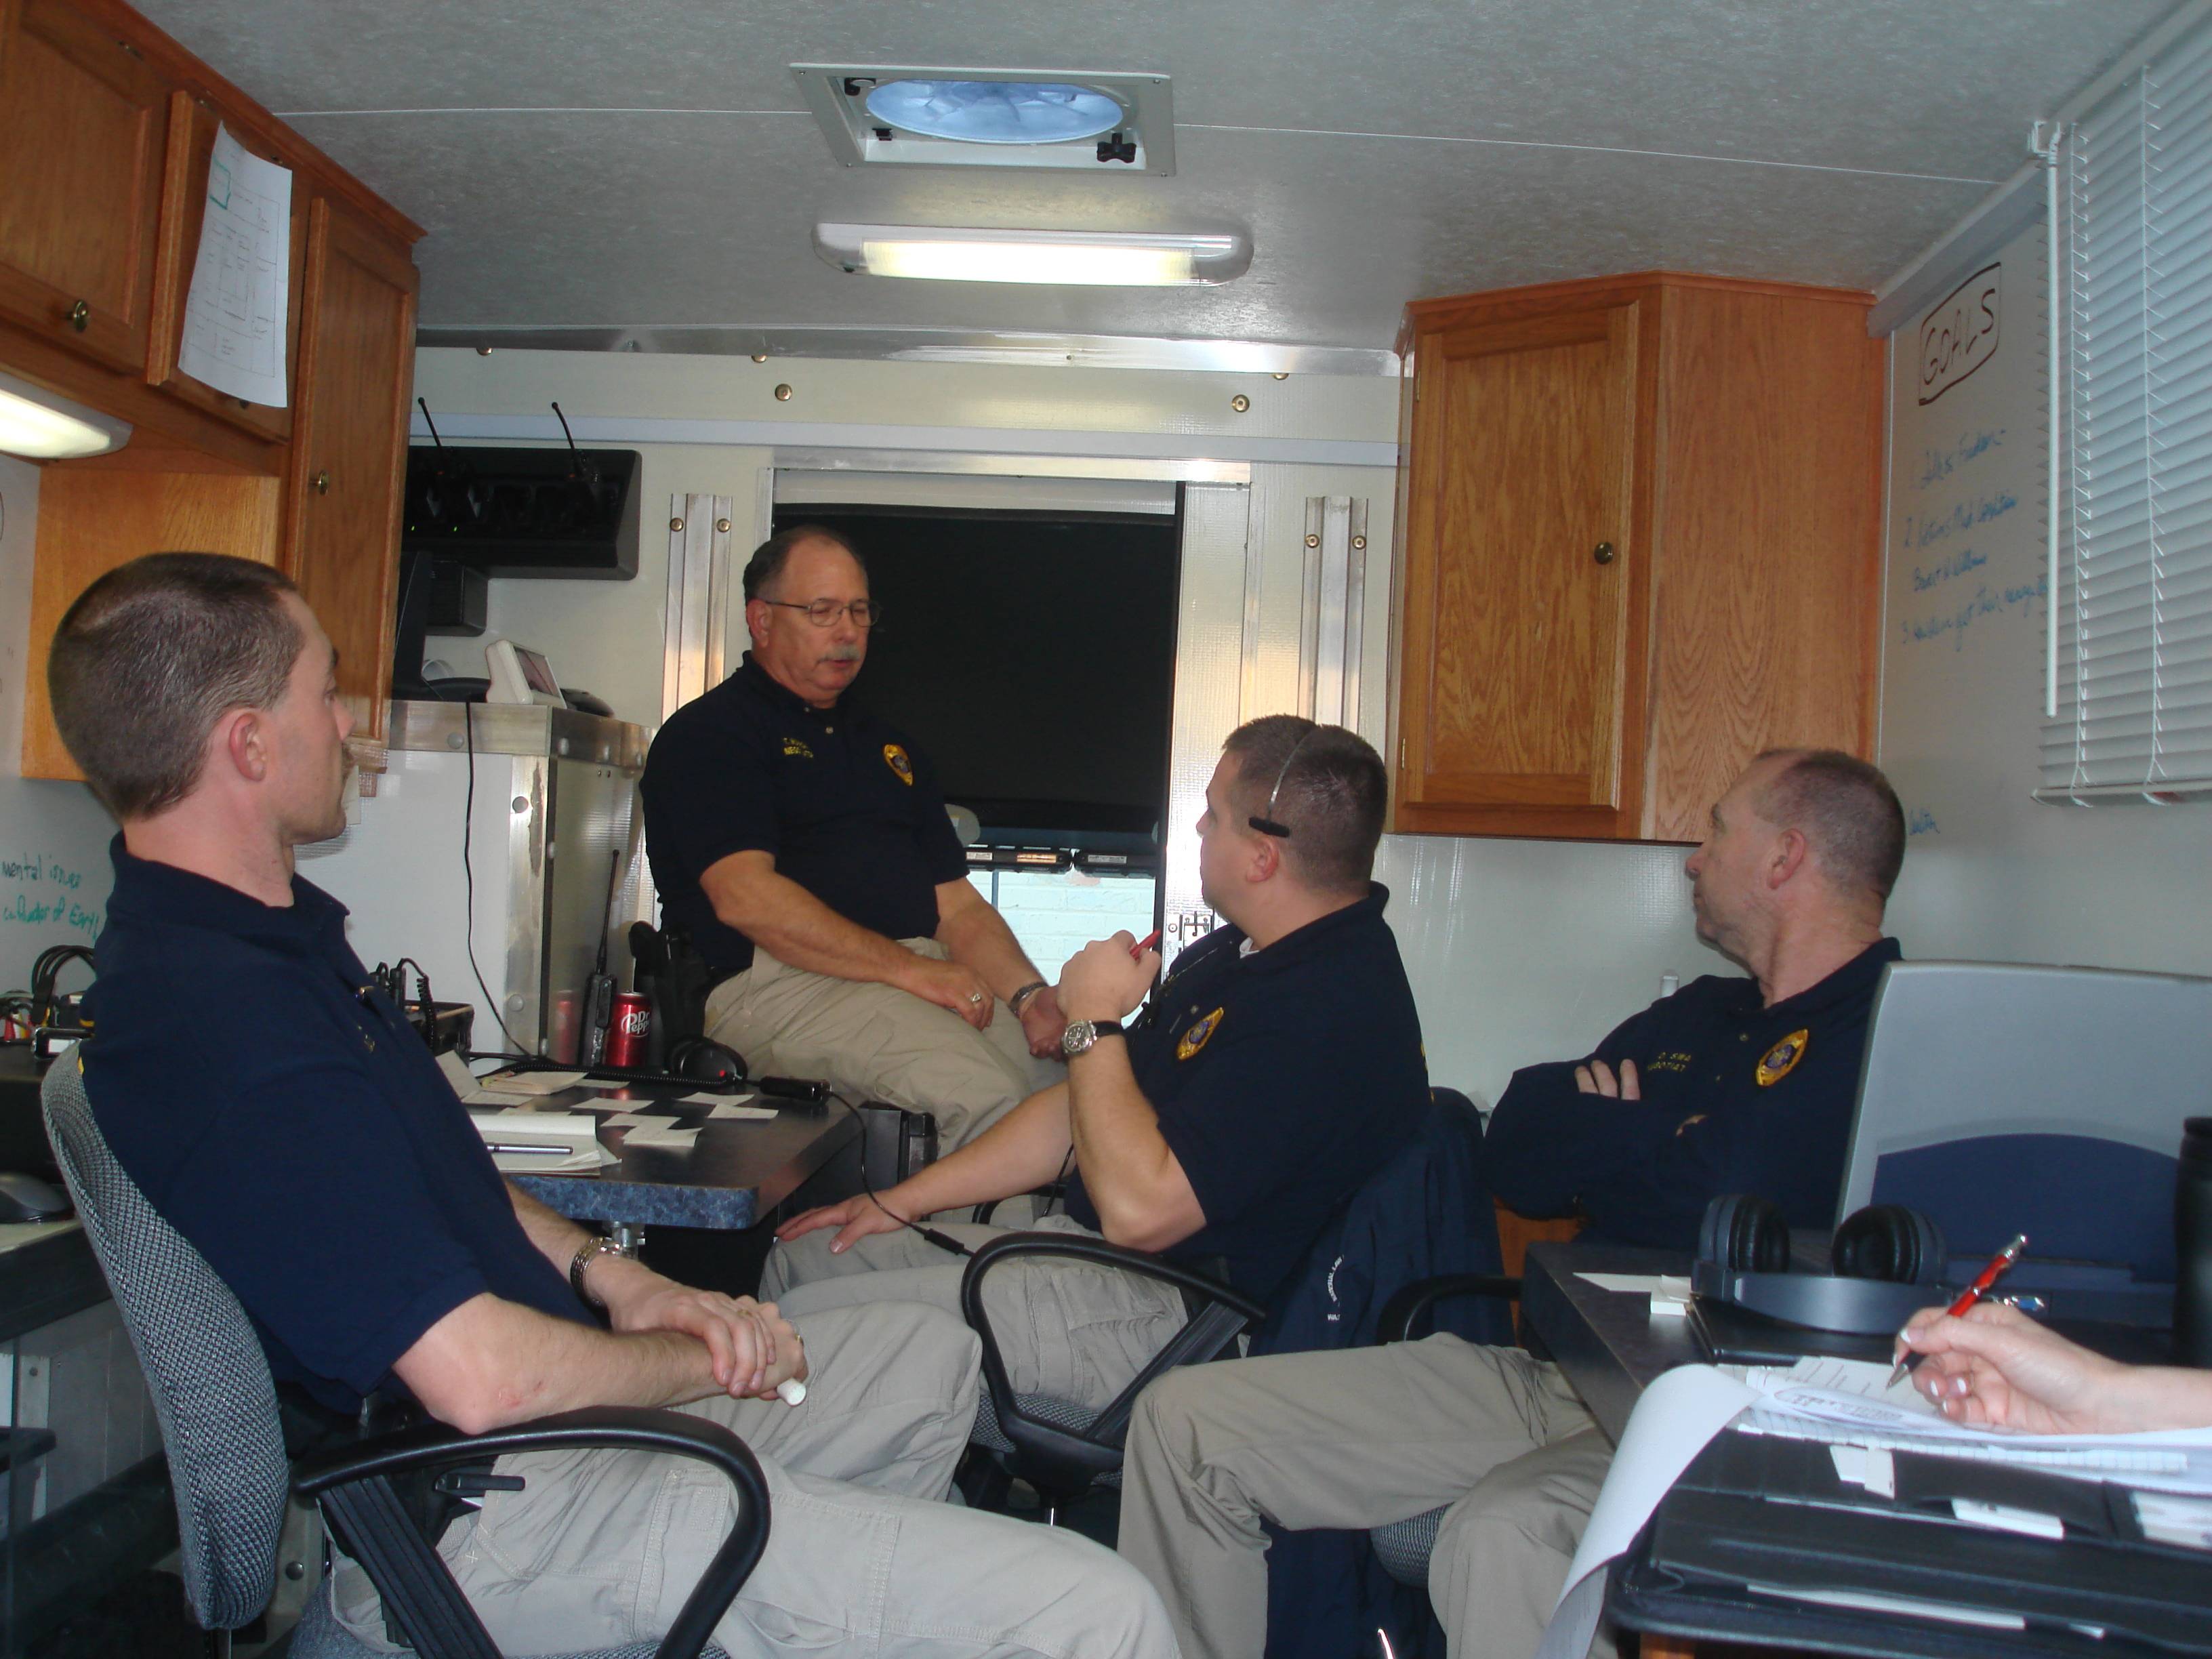 A group of negotiators sit together in a mobile unit